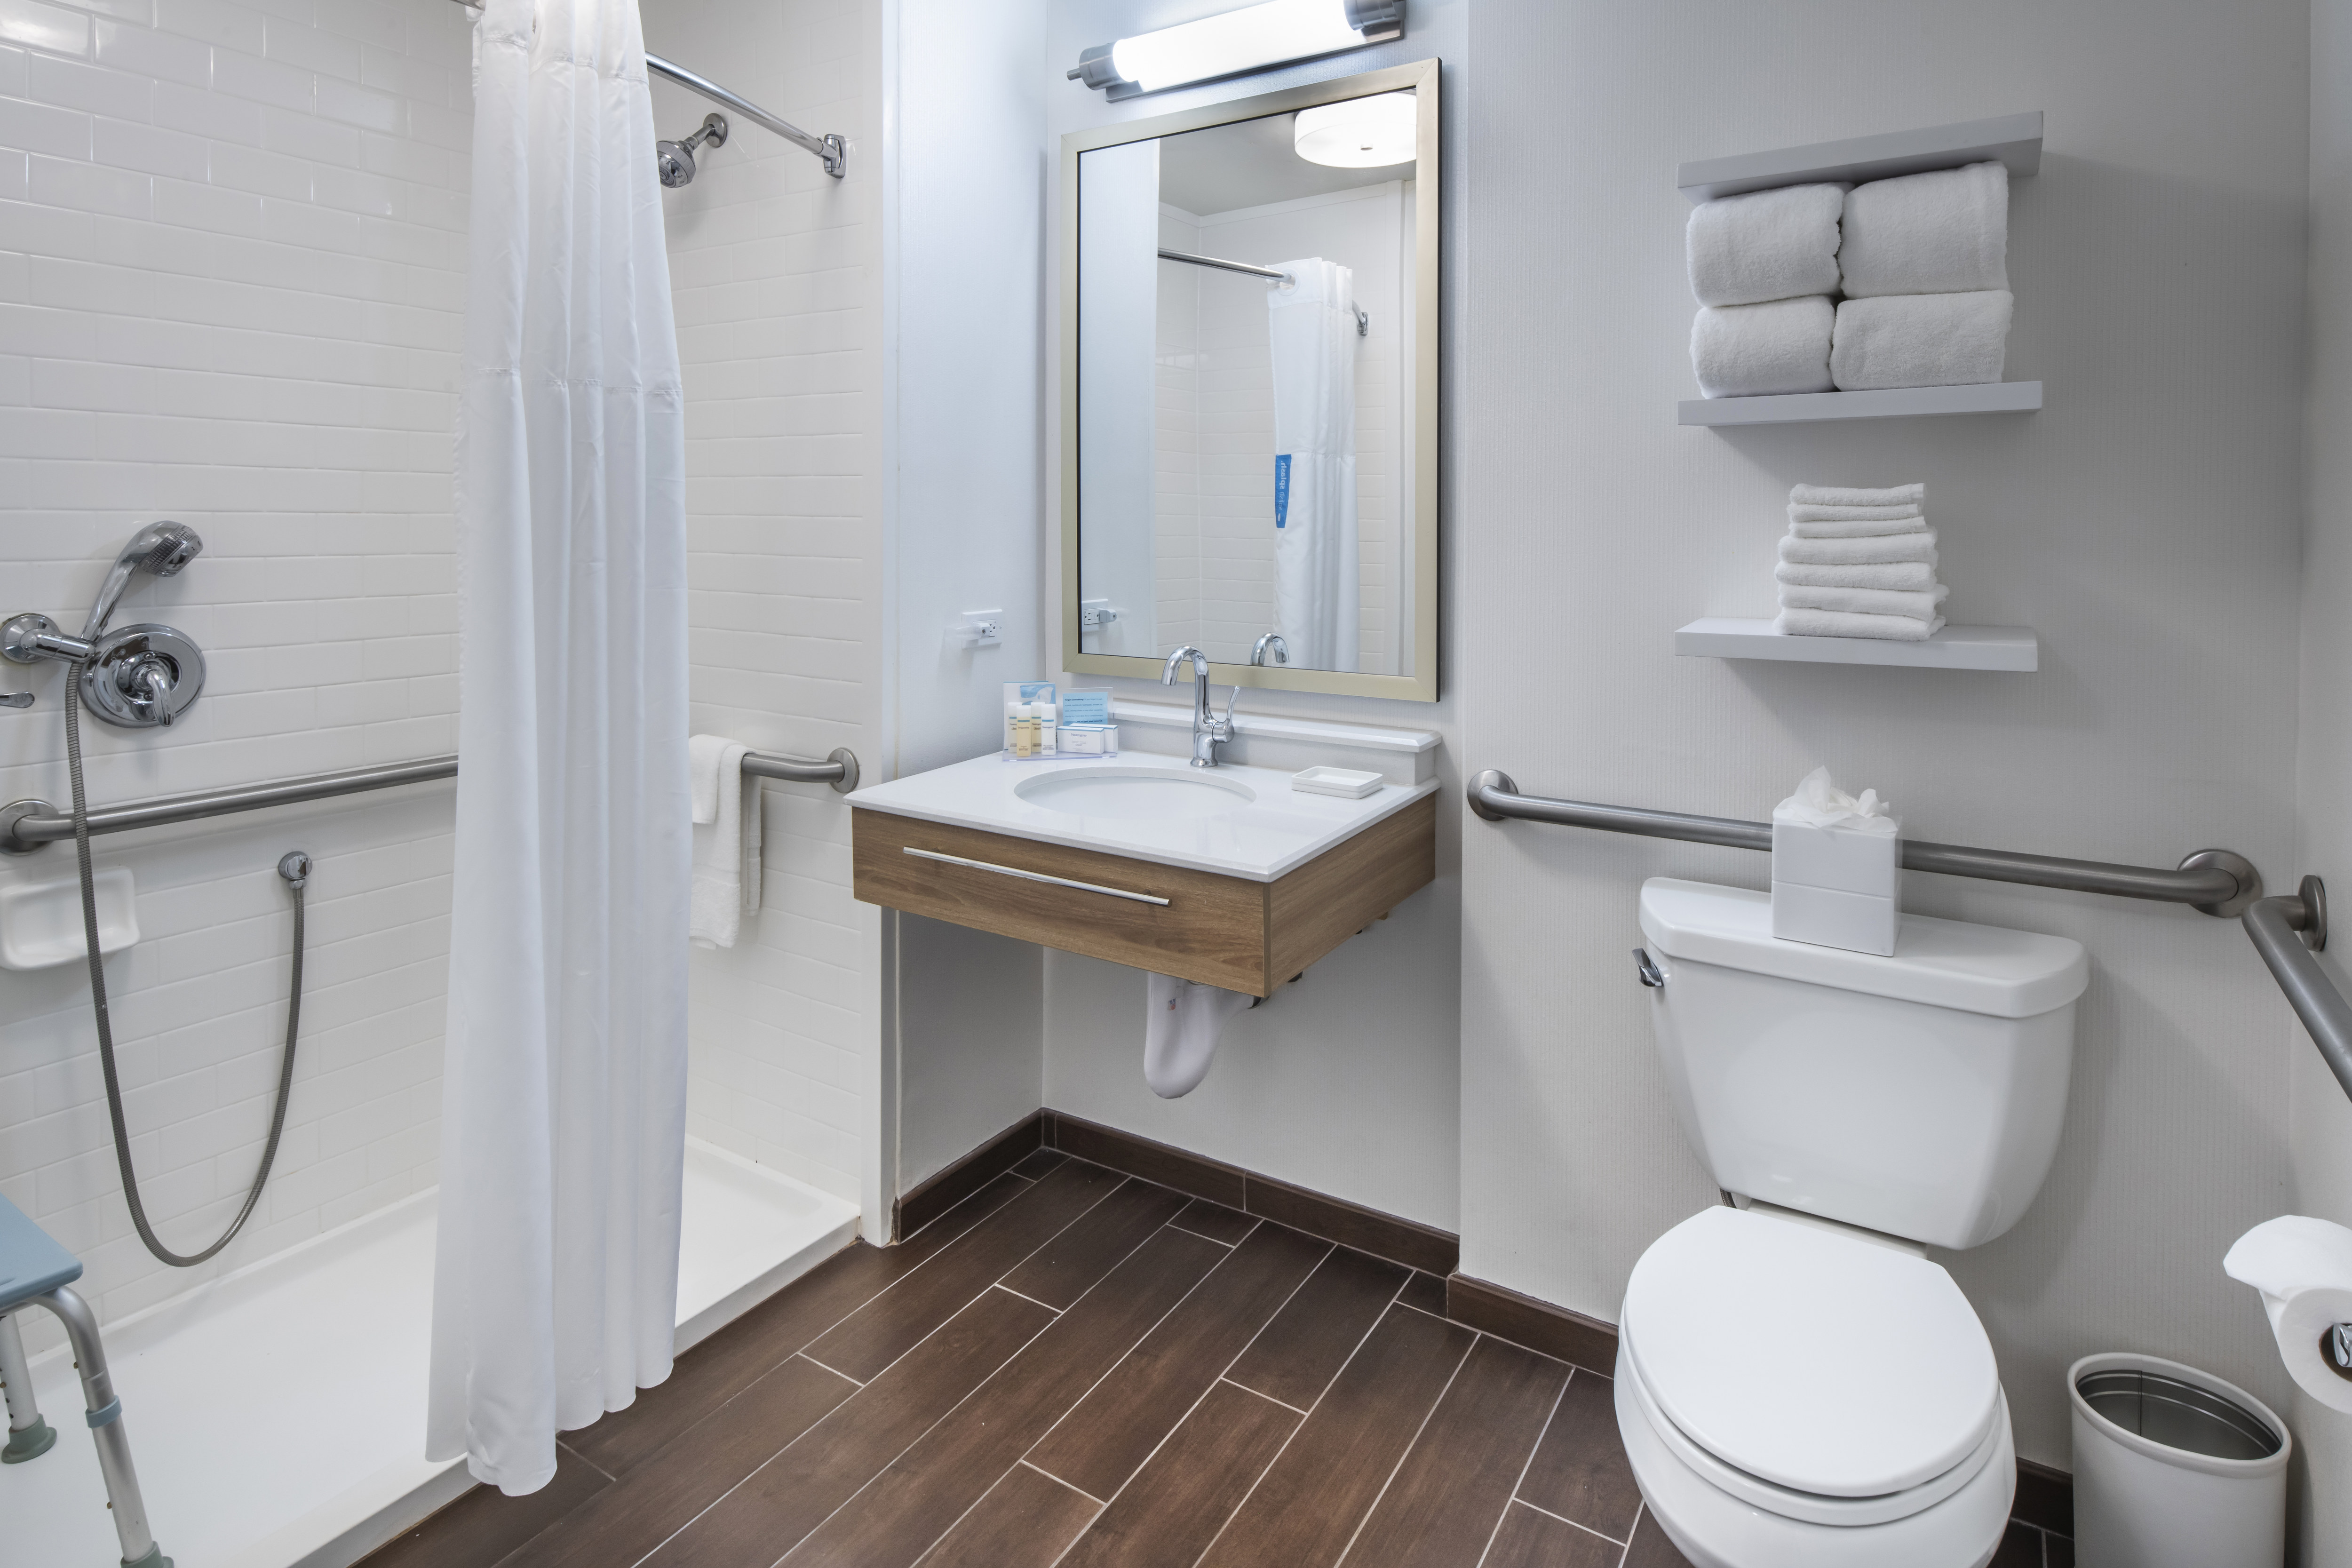 Accessible Roll-in Shower and Bathroom